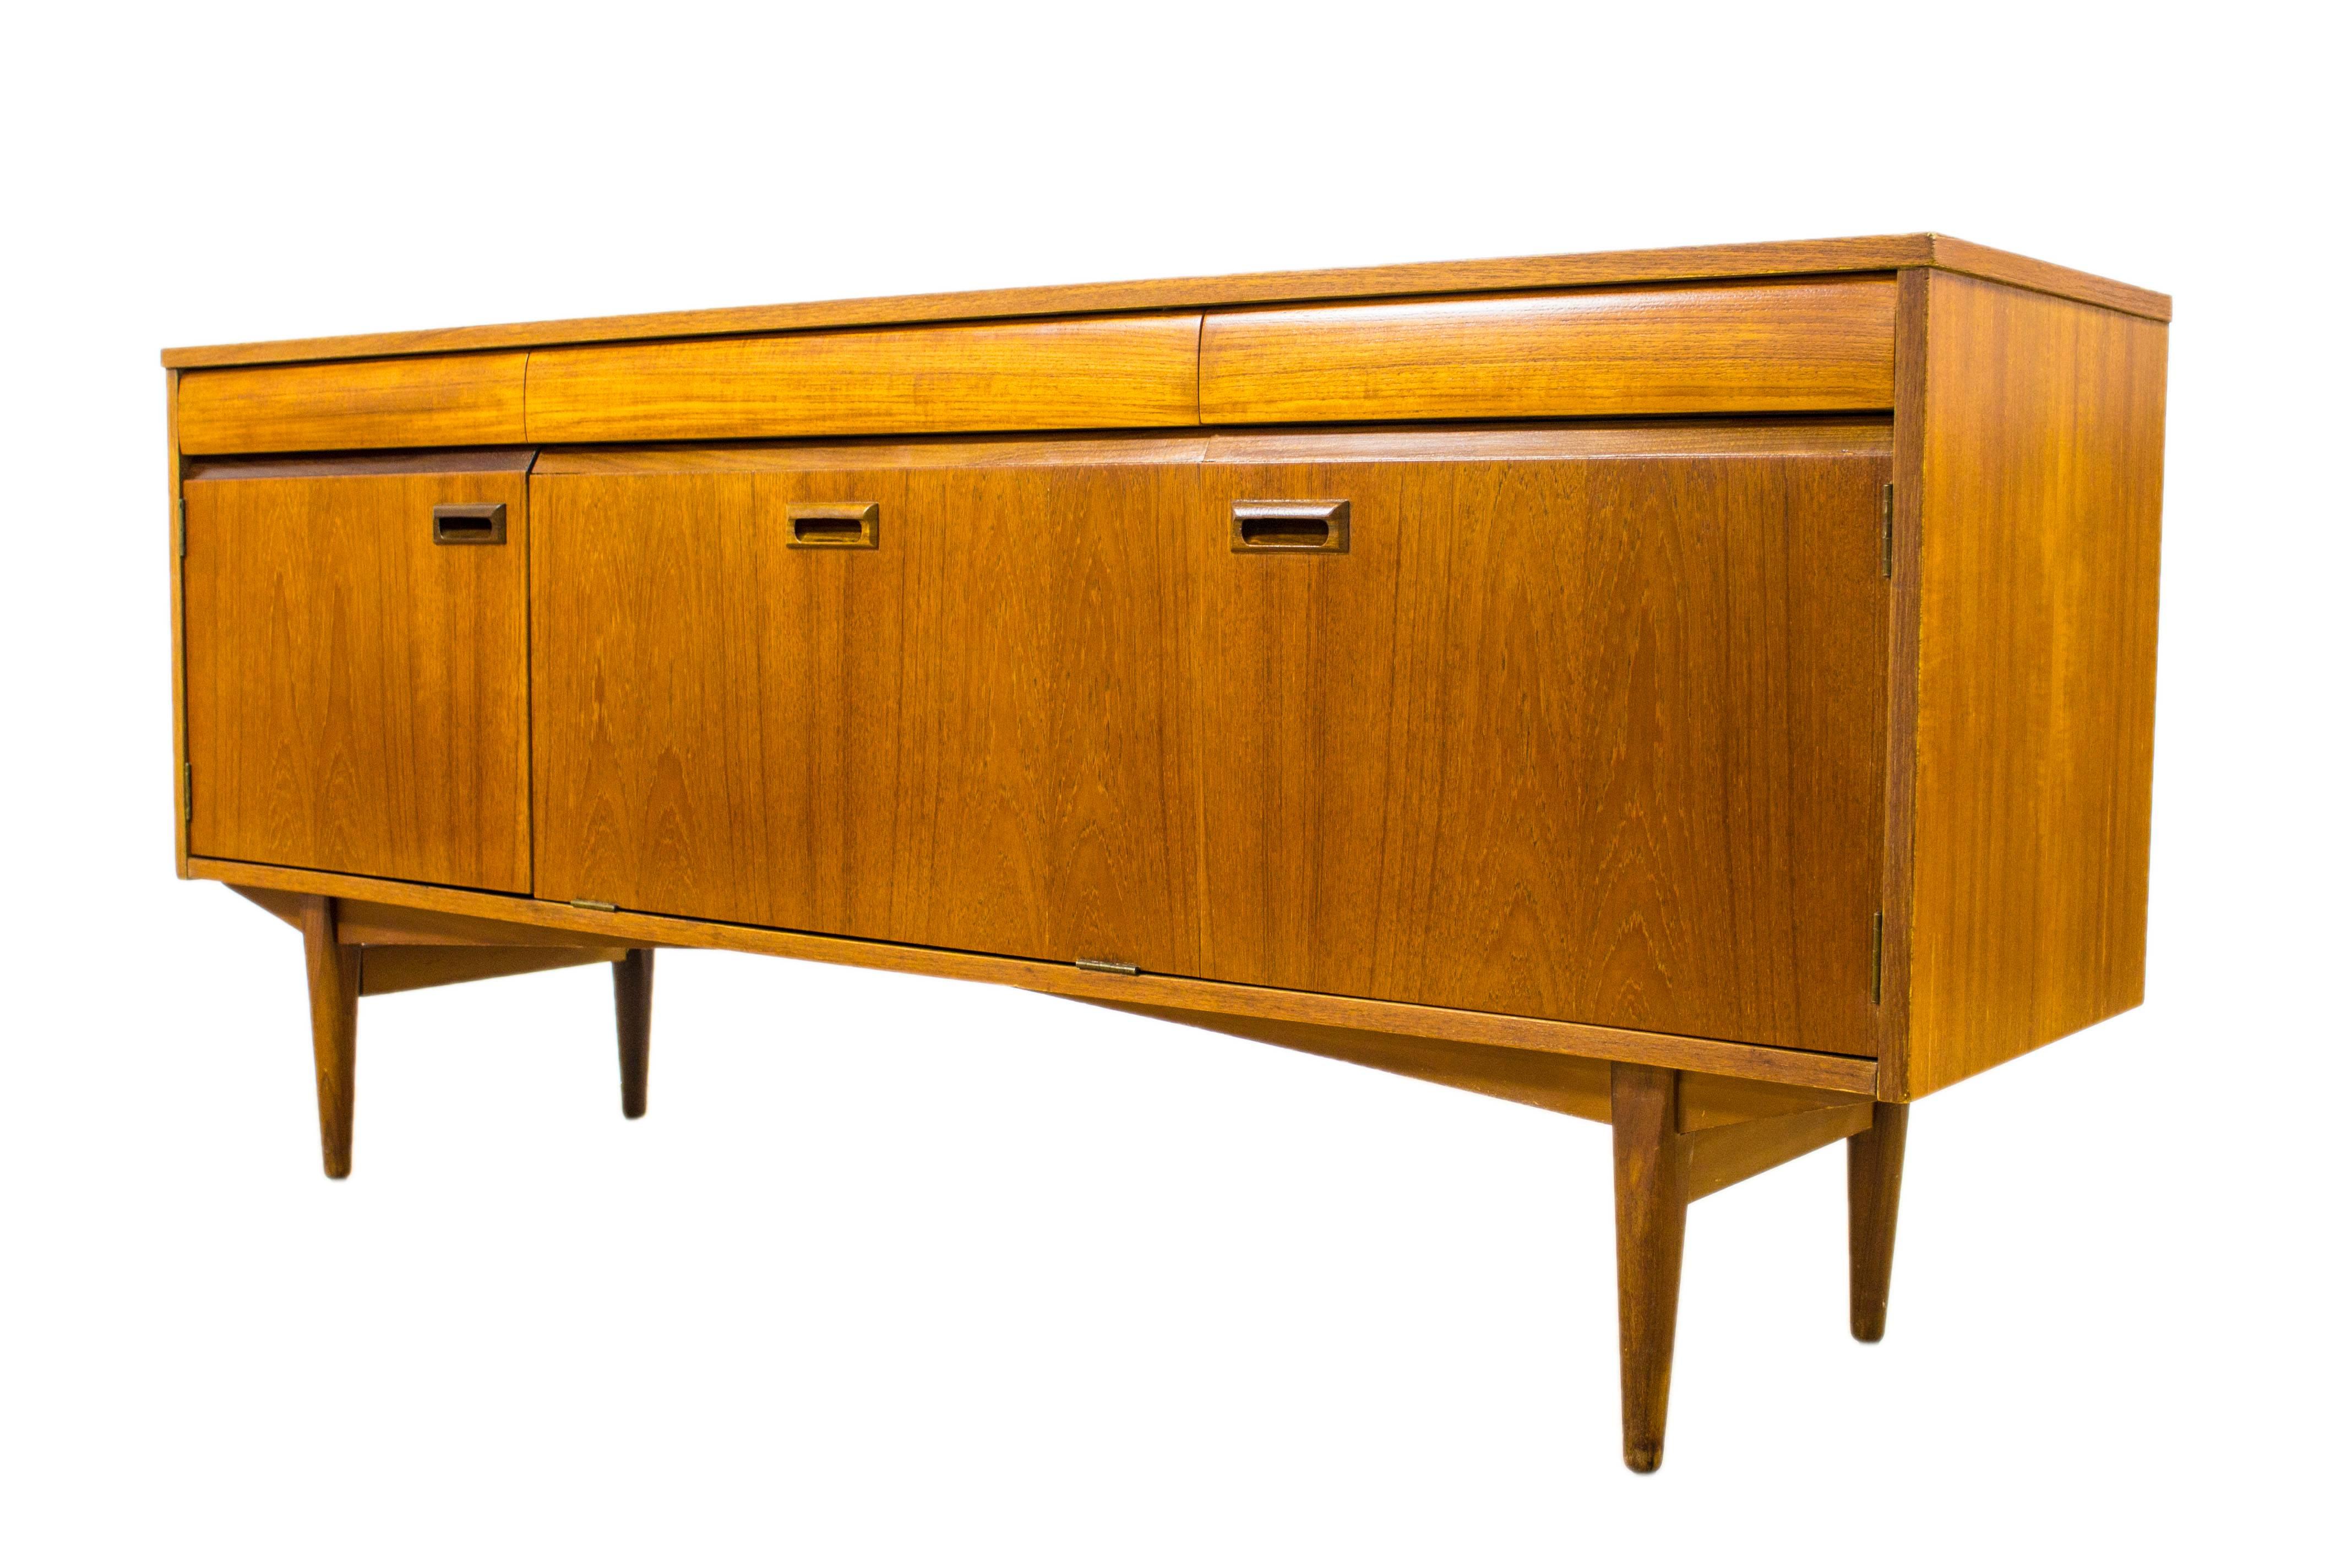 Greaves & Thomas Teak Sideboard Midcentury G Plan Eames Era In Good Condition For Sale In Greater Manchester, GB